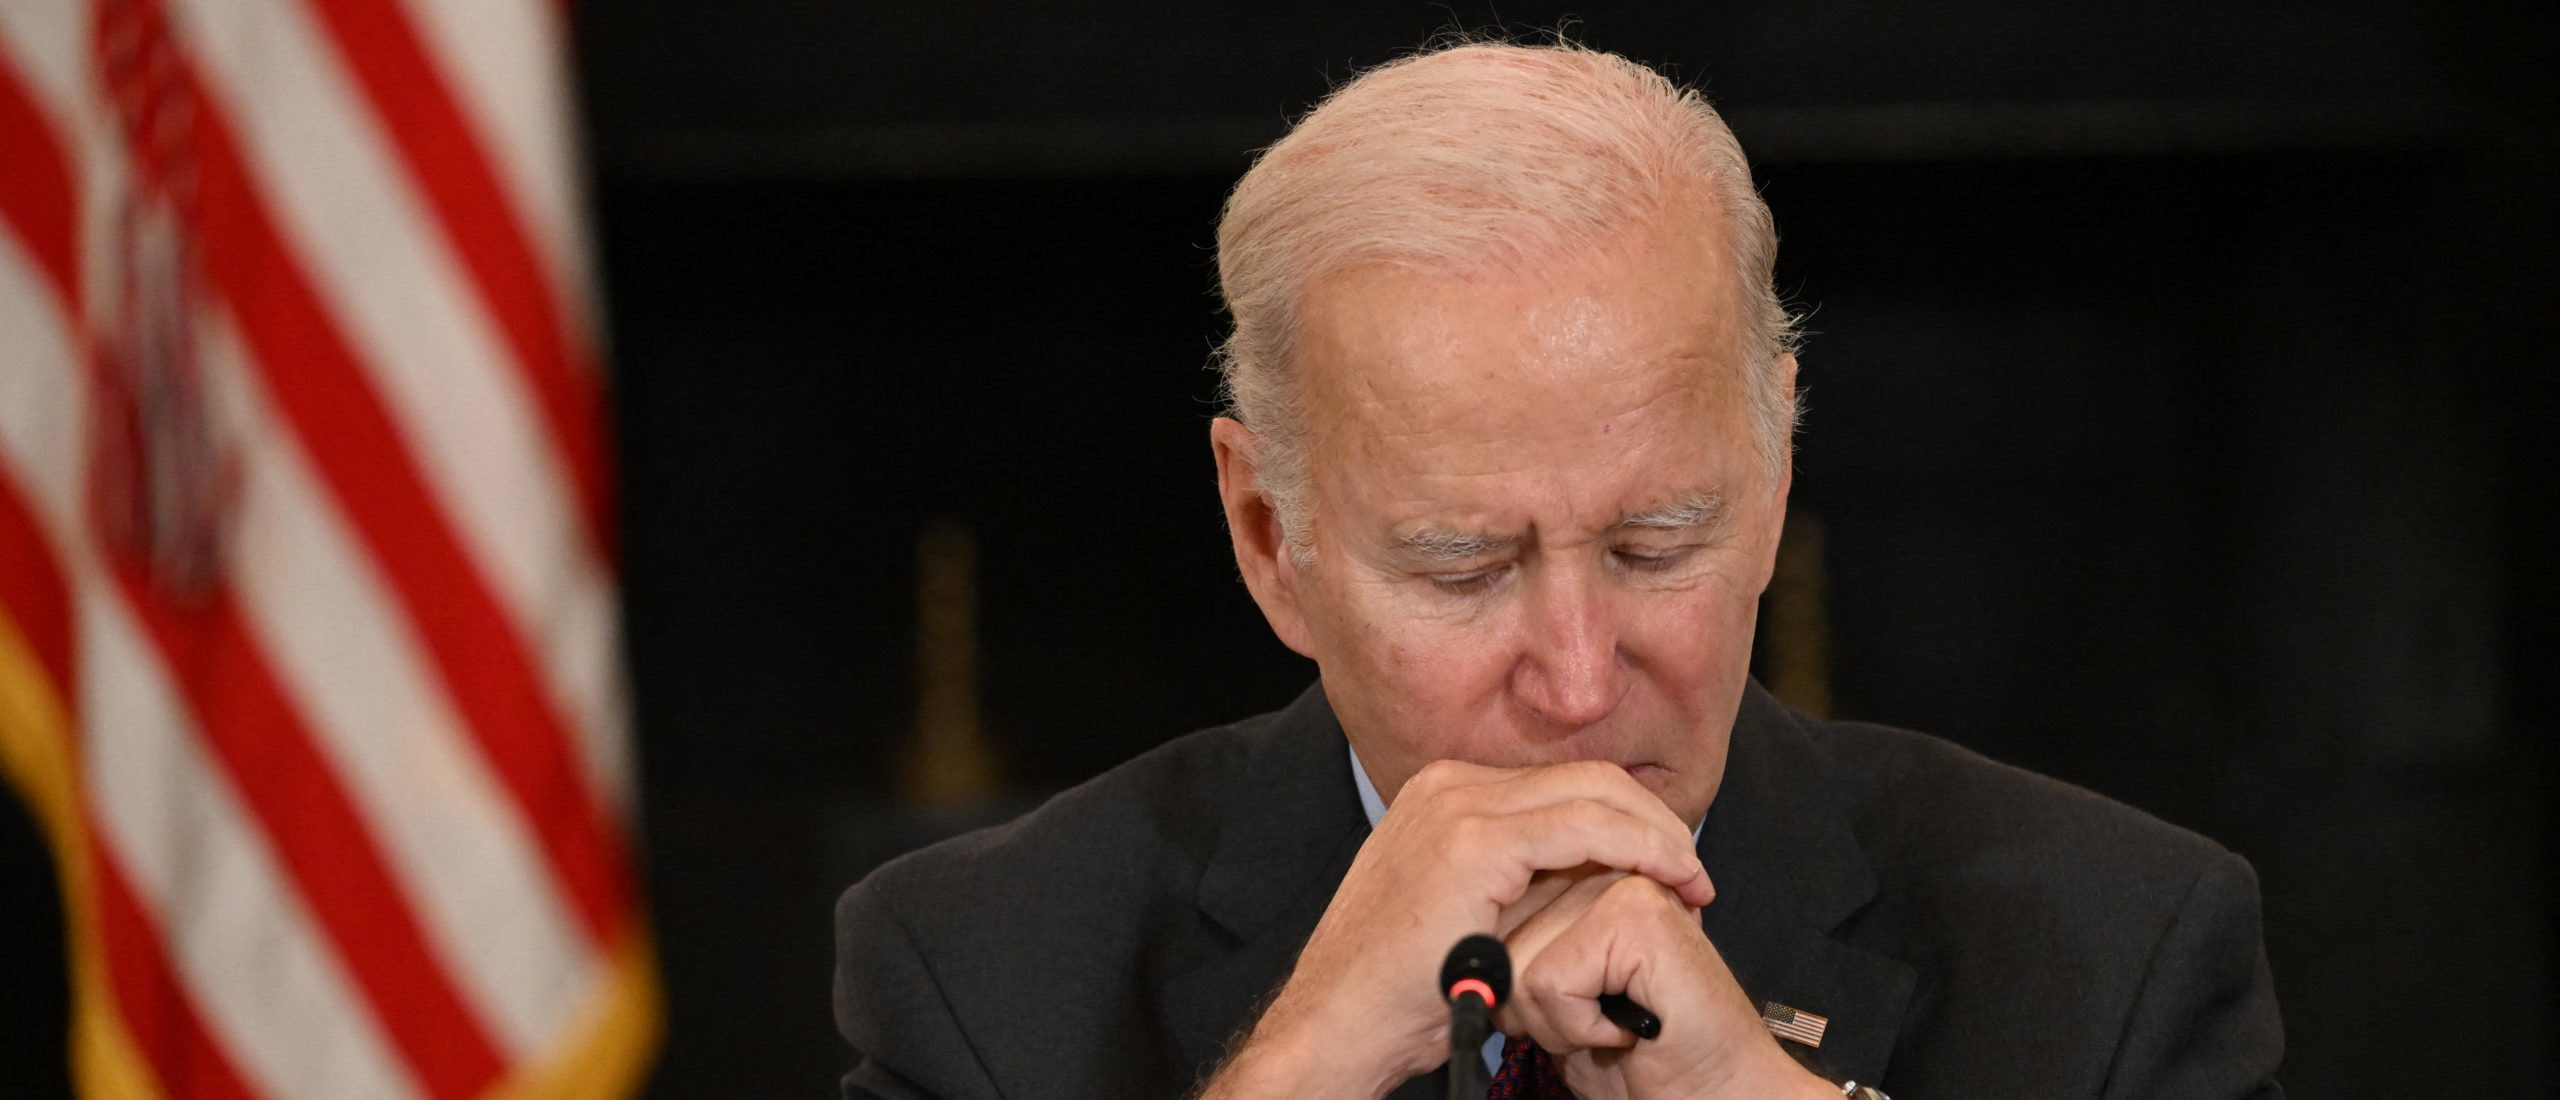 Biden Admin Begged Saudis To Delay Oil Production Cuts Until Days Before The Election: REPORT